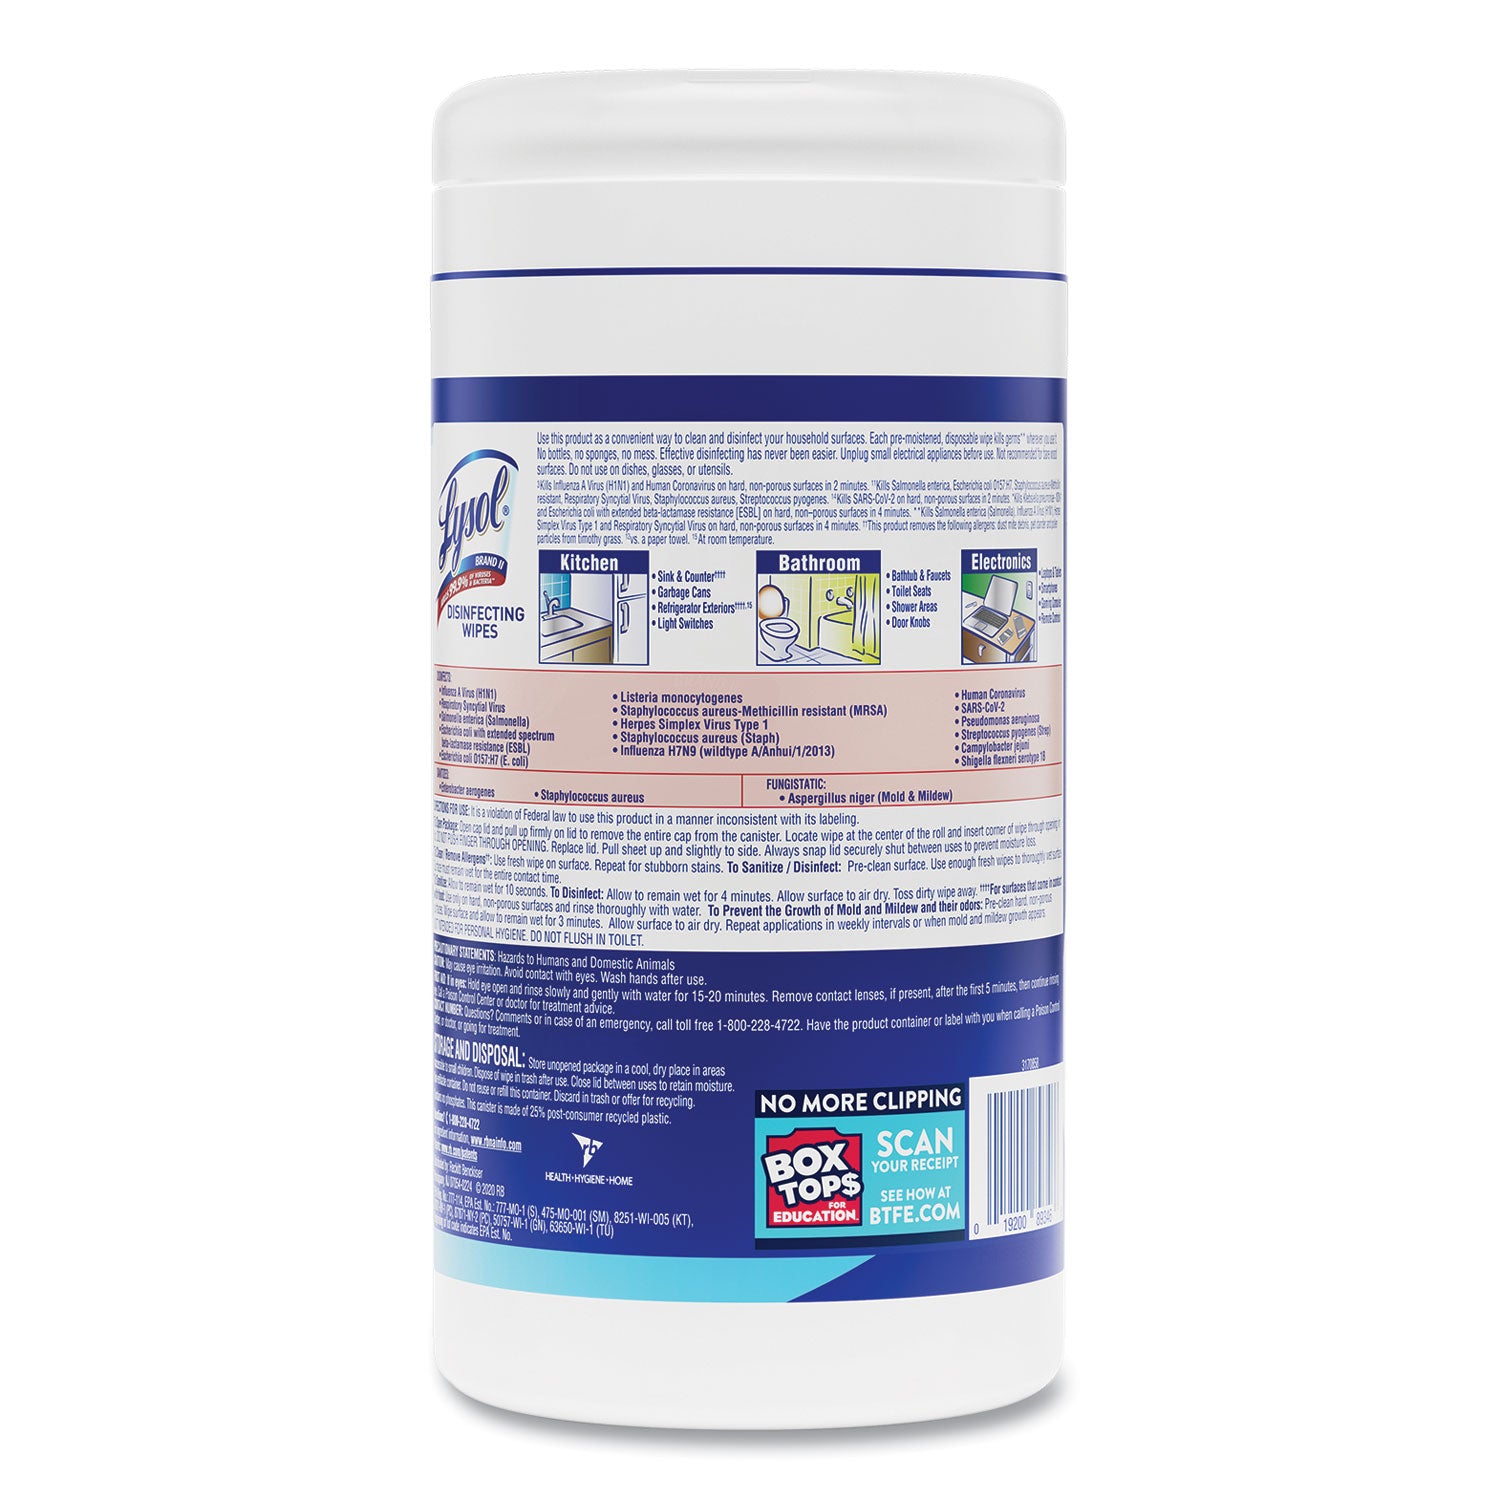 Disinfecting Wipes, 1-Ply, 7 x 7.25, Crisp Linen, White, 80 Wipes/Canister, 6 Canisters/Carton - 